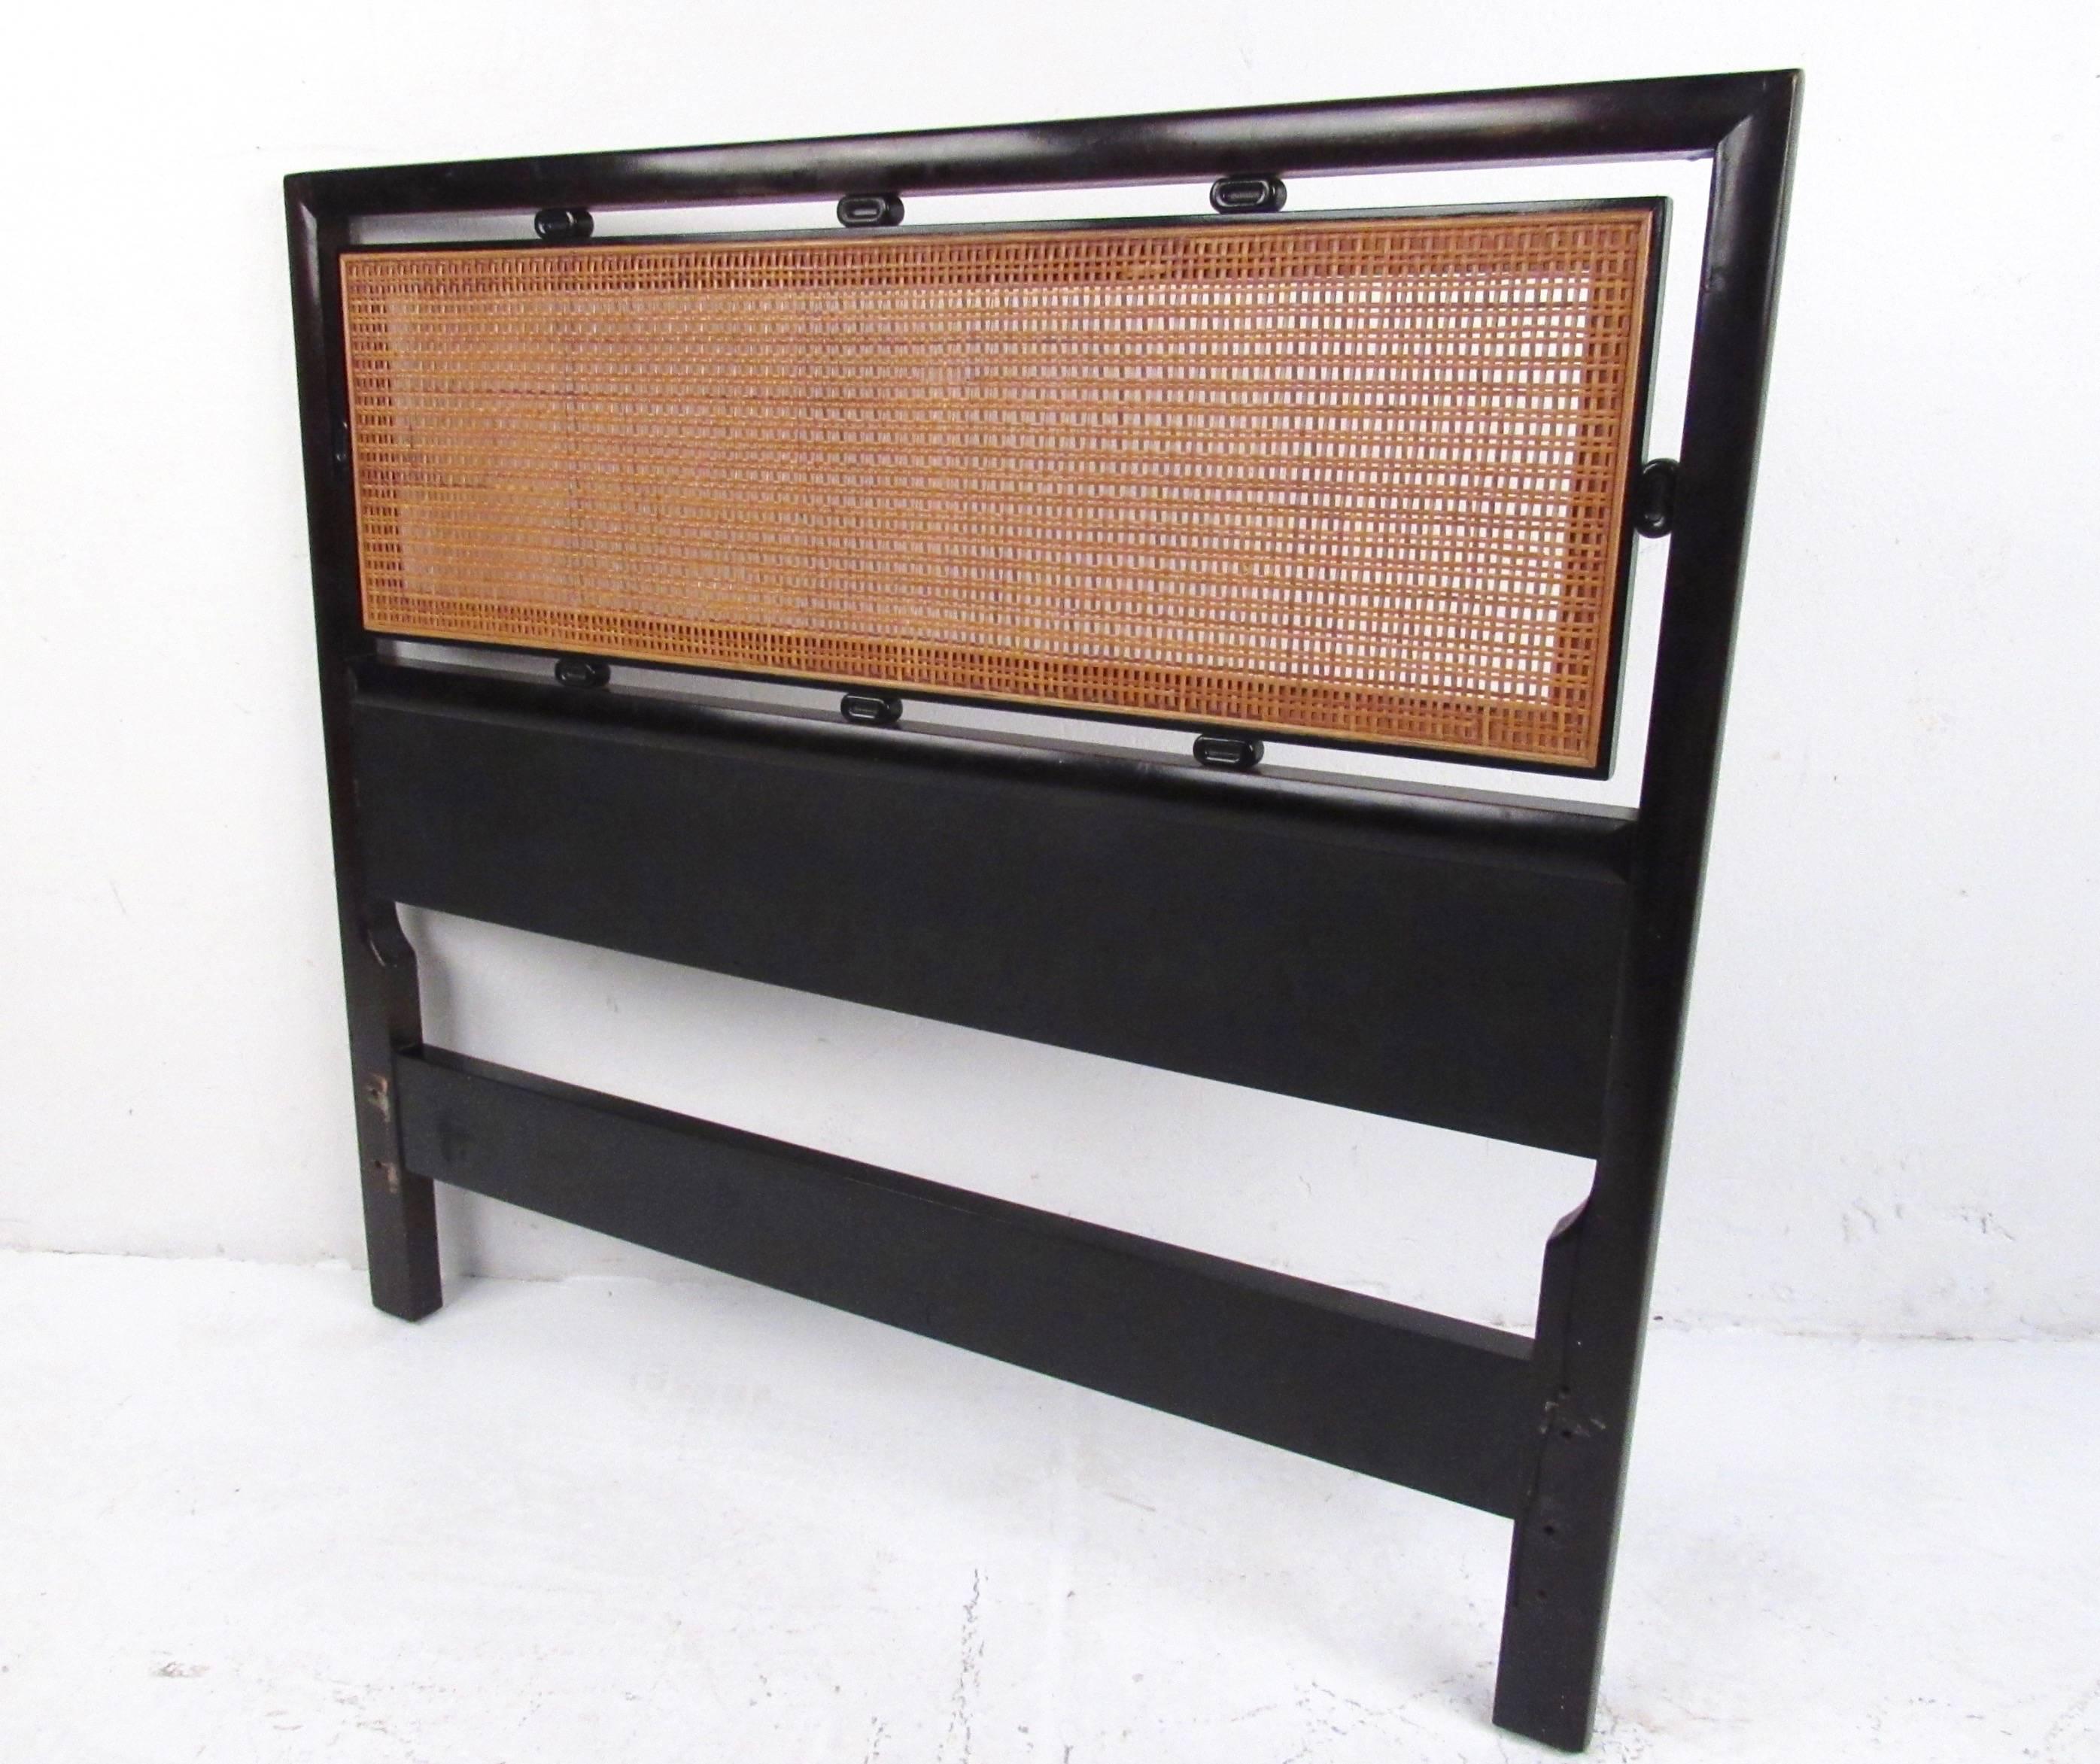 Matching midcentury pair of twin size headboards by Michael Taylor for Baker furniture. Stylish mix of hardwood construction and vintage caning. Please confirm item location (NY or NJ).